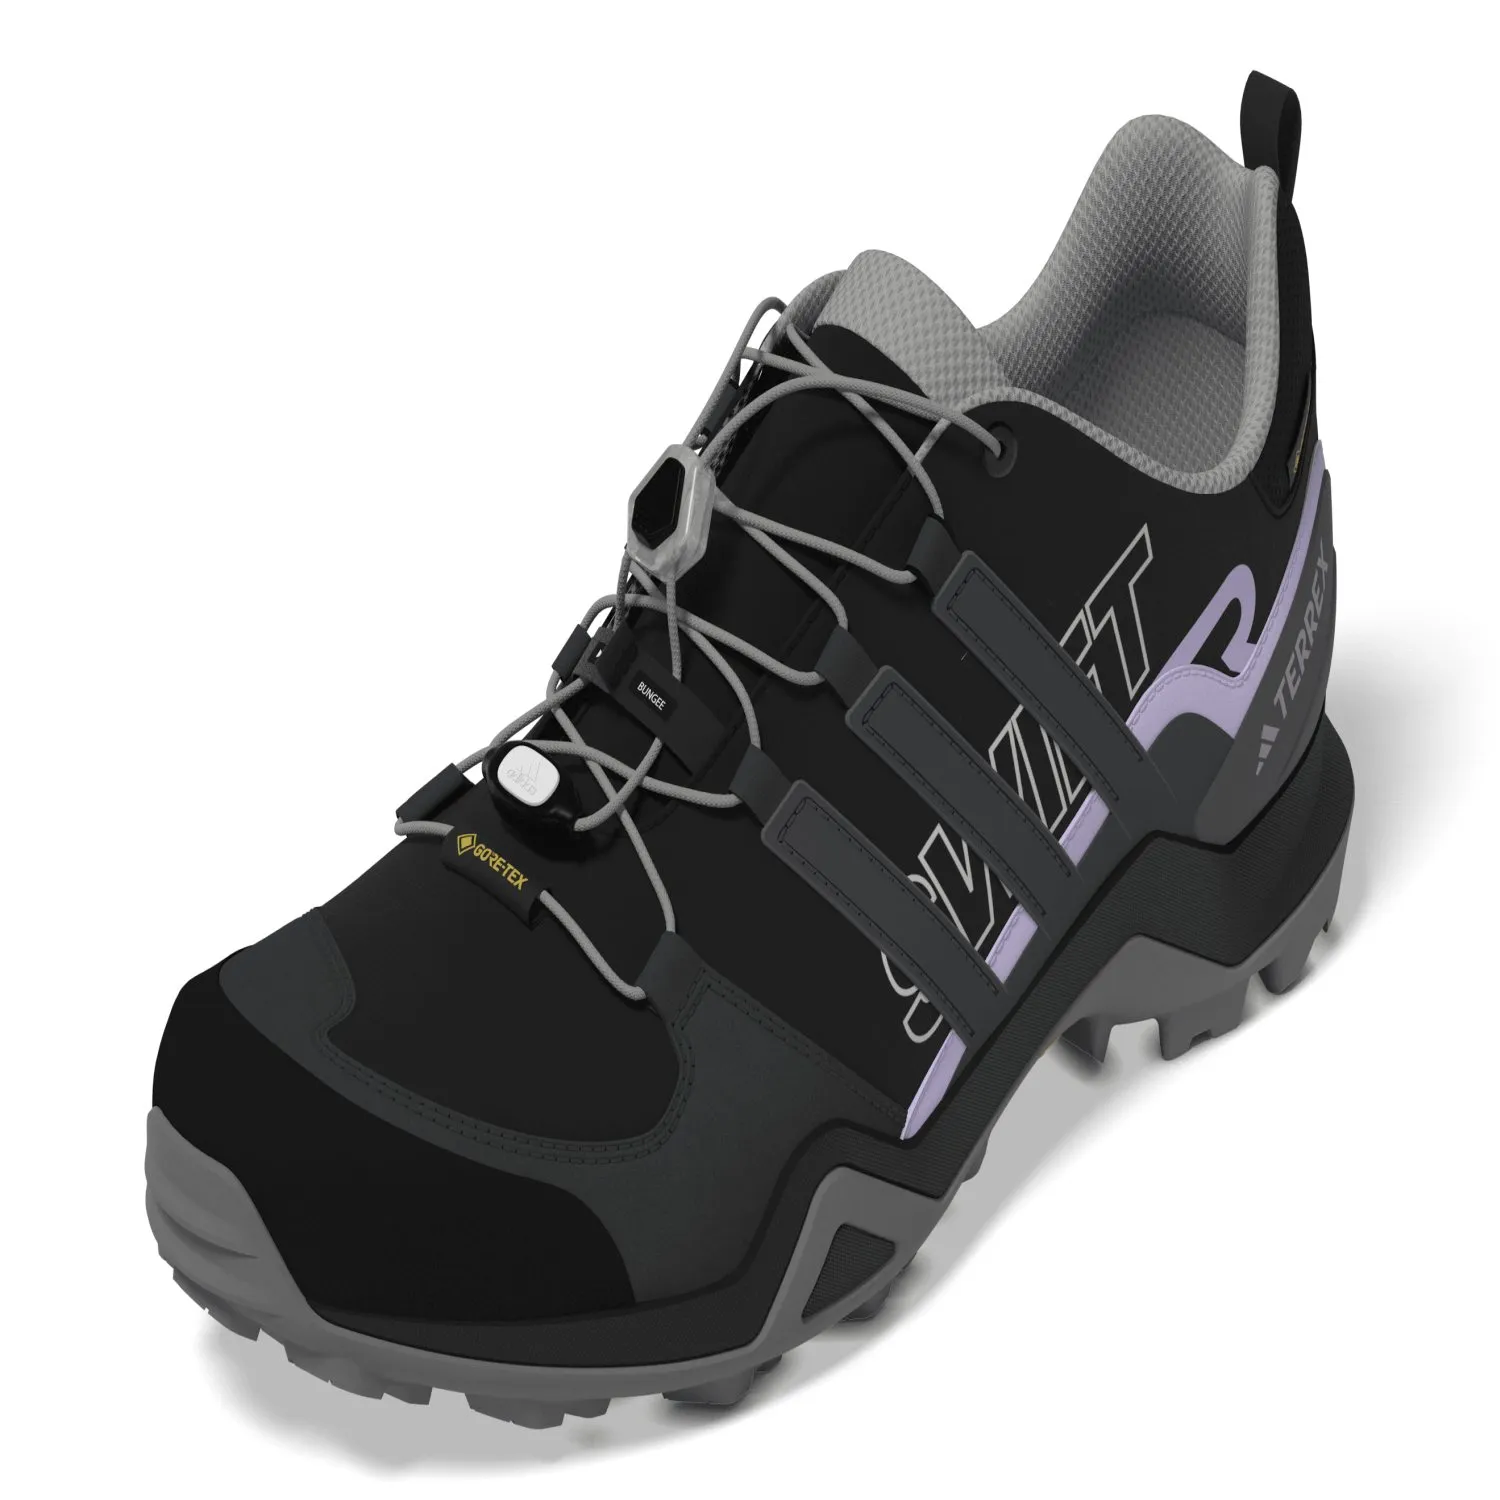 IF7634_11_FOOTWEAR_3D - Rendering_Side Lateral Left View_white.jpg